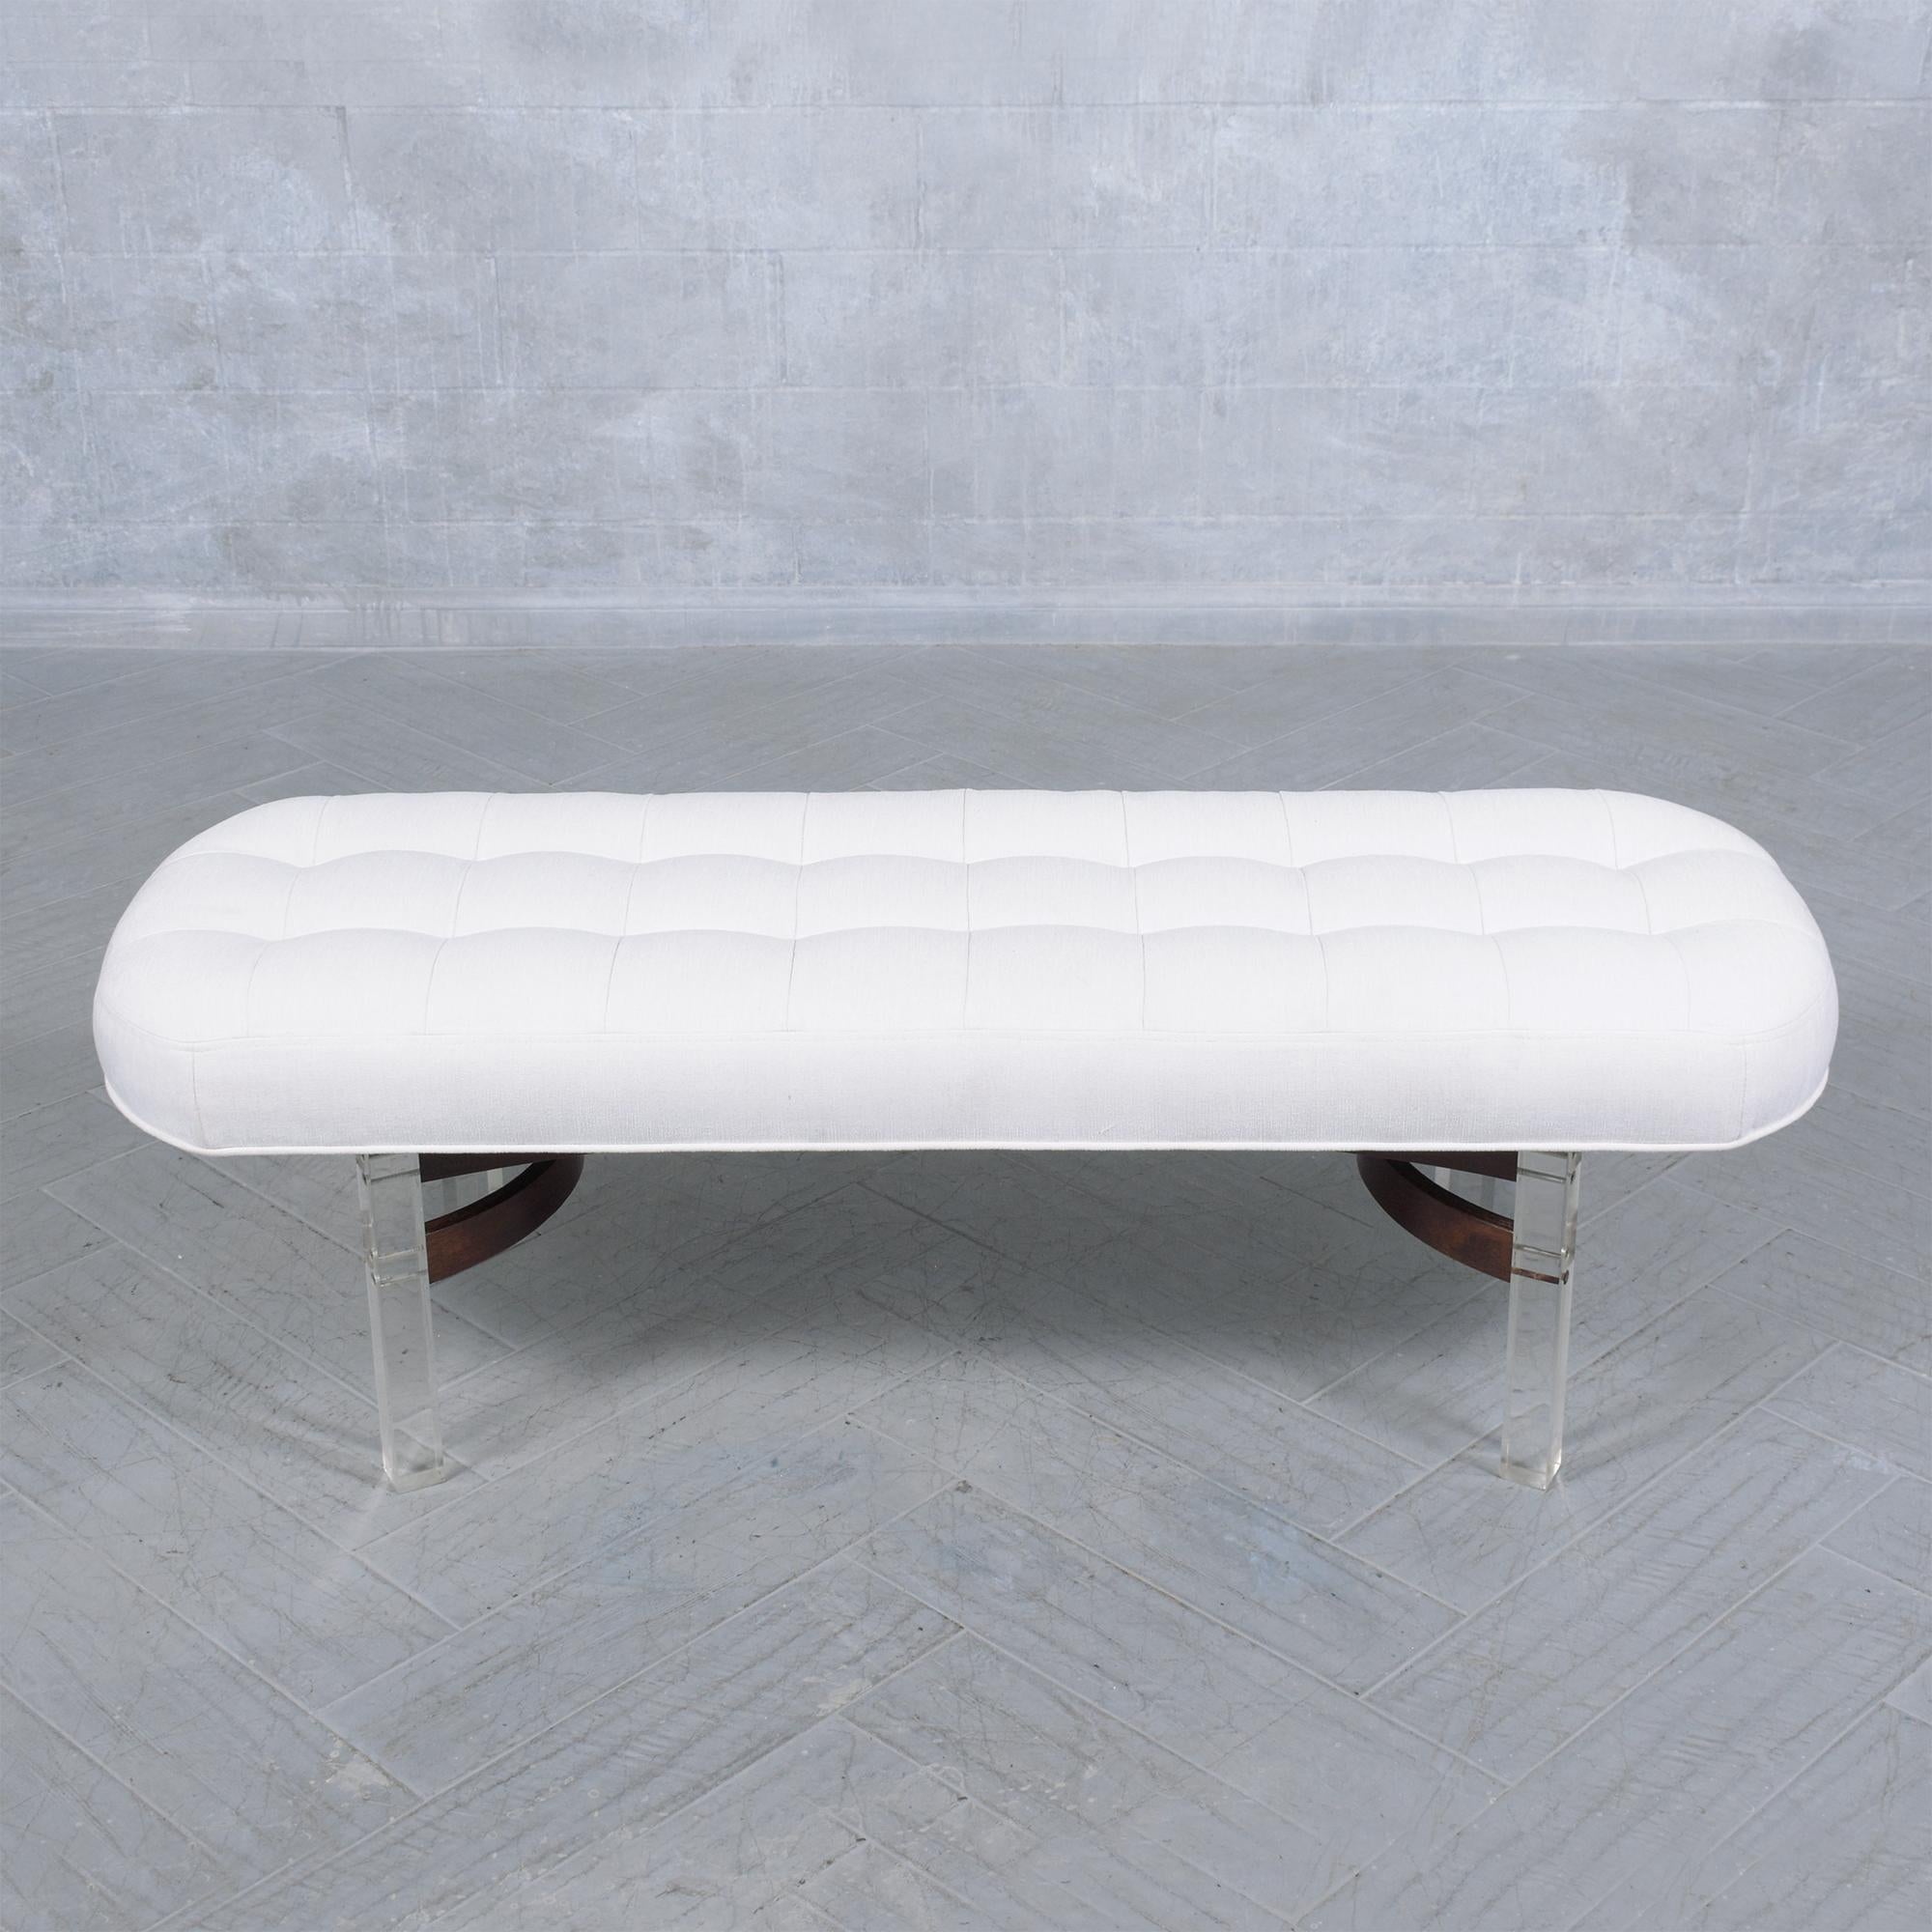 Restored Mid-Century Modern Rosewood & Lucite Bench with White Linen Upholstery In Good Condition For Sale In Los Angeles, CA